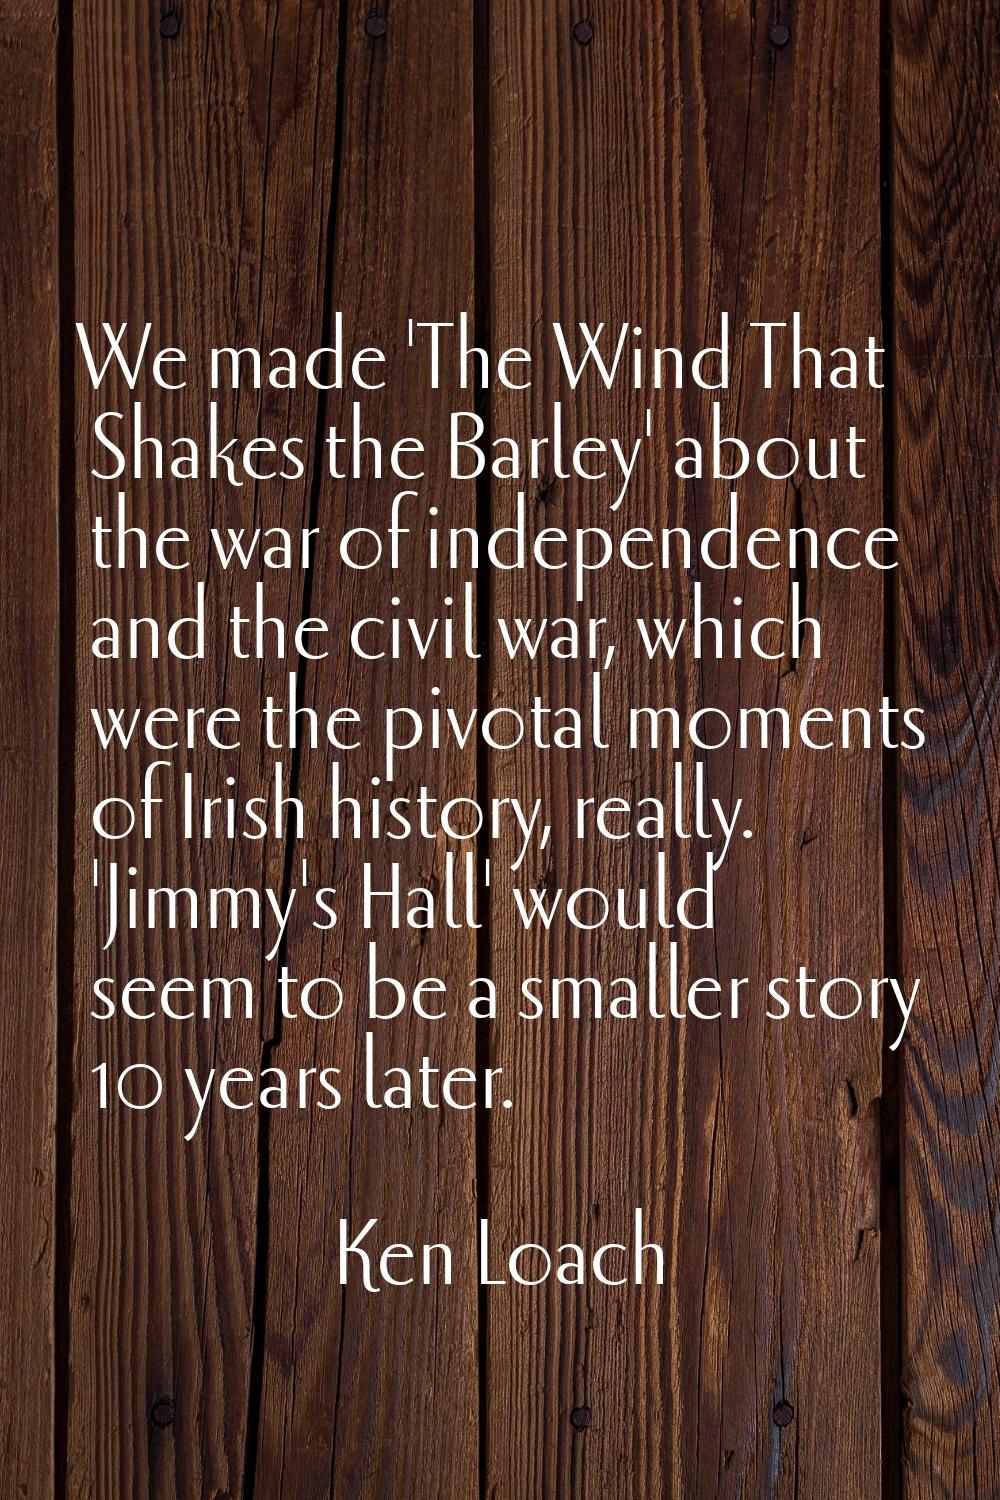 We made 'The Wind That Shakes the Barley' about the war of independence and the civil war, which we